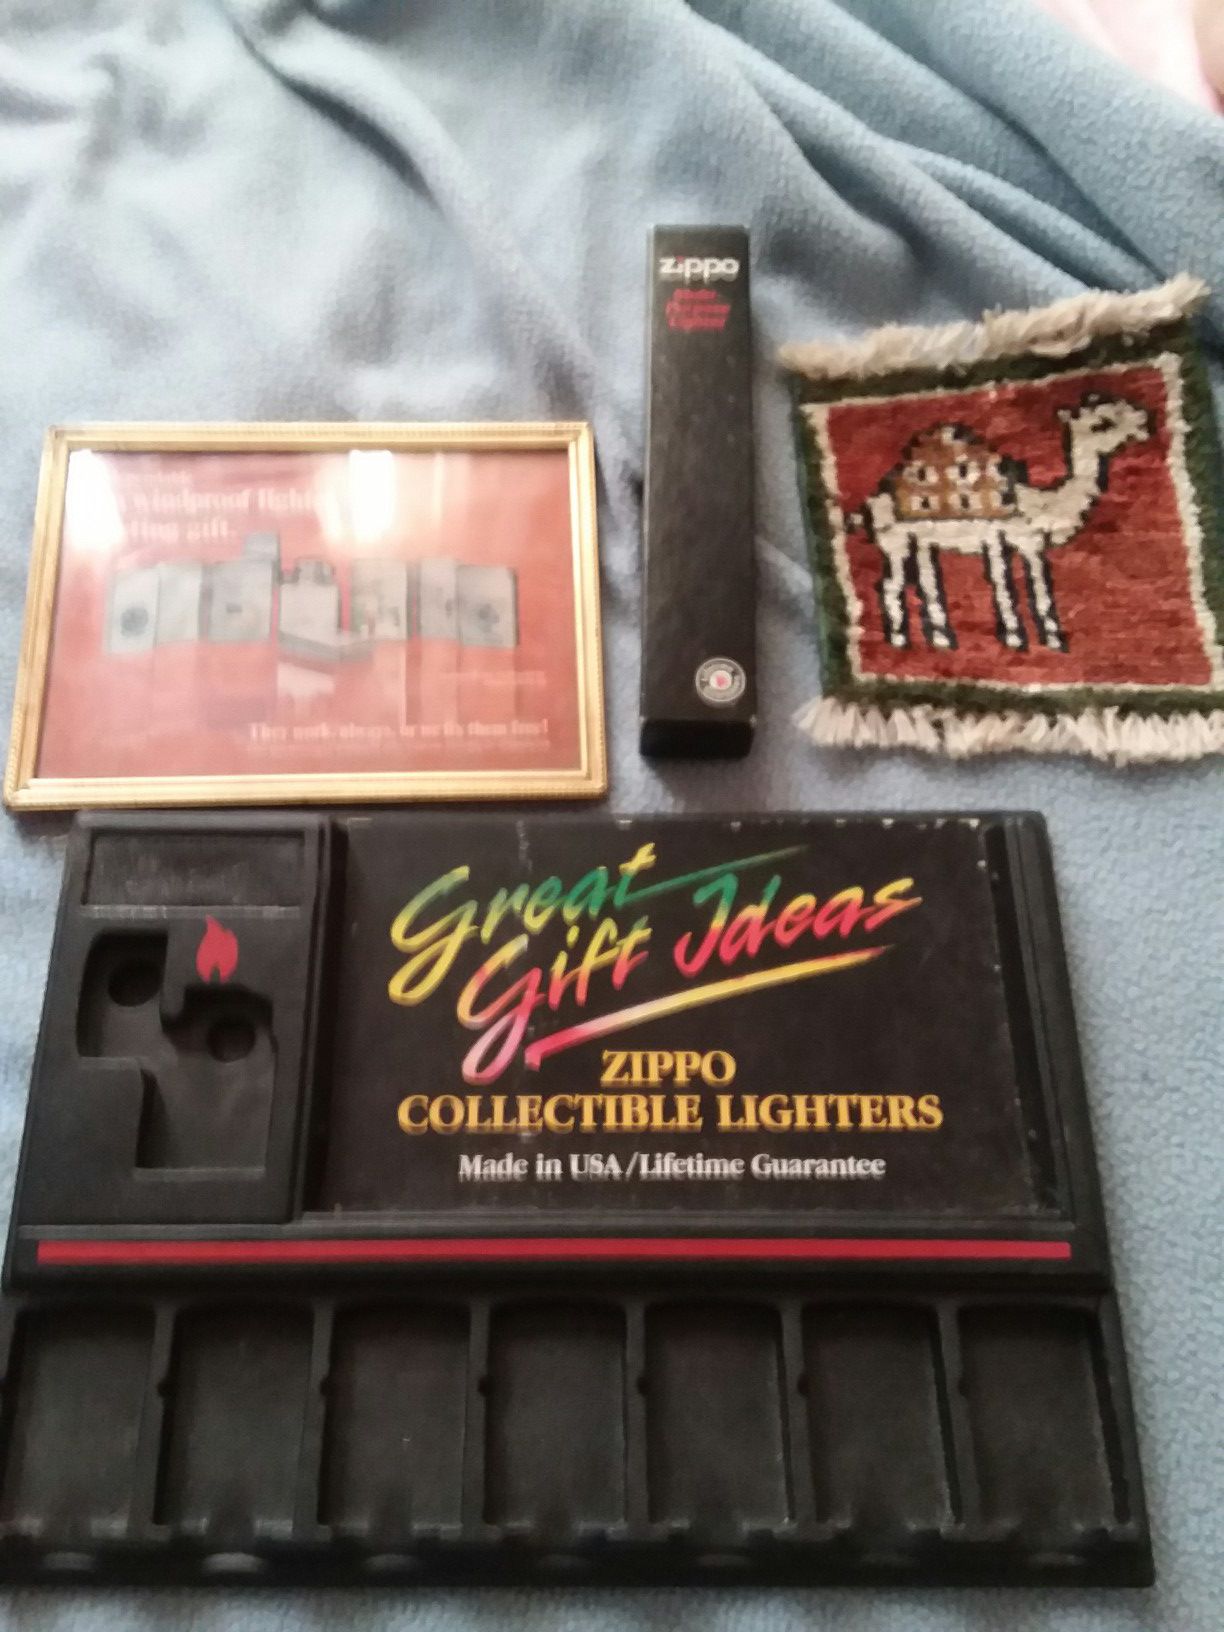 Zippo lighters and advertising